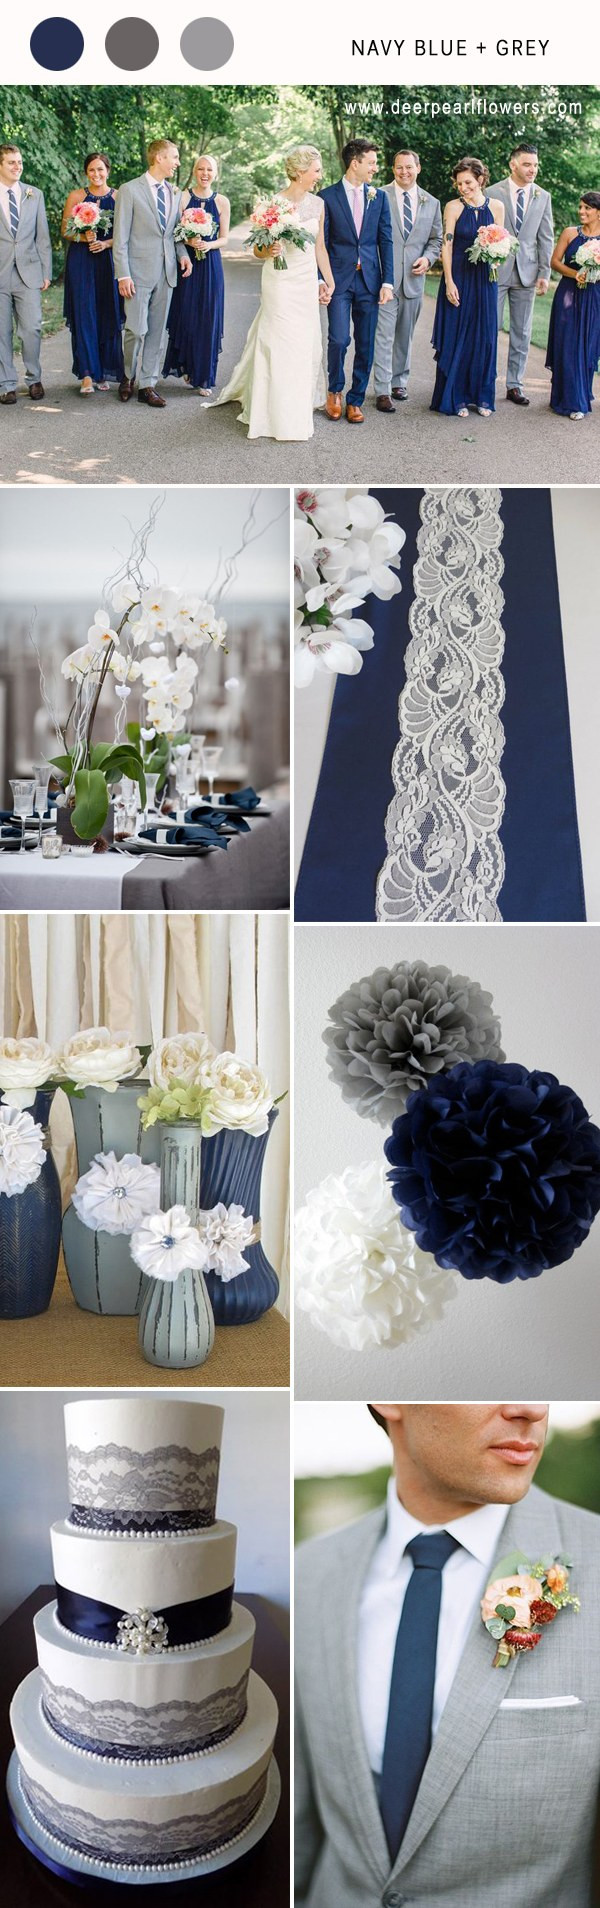 Blue And Grey Wedding Colors
 Top 10 Navy Blue Wedding Color bo Ideas for 2018